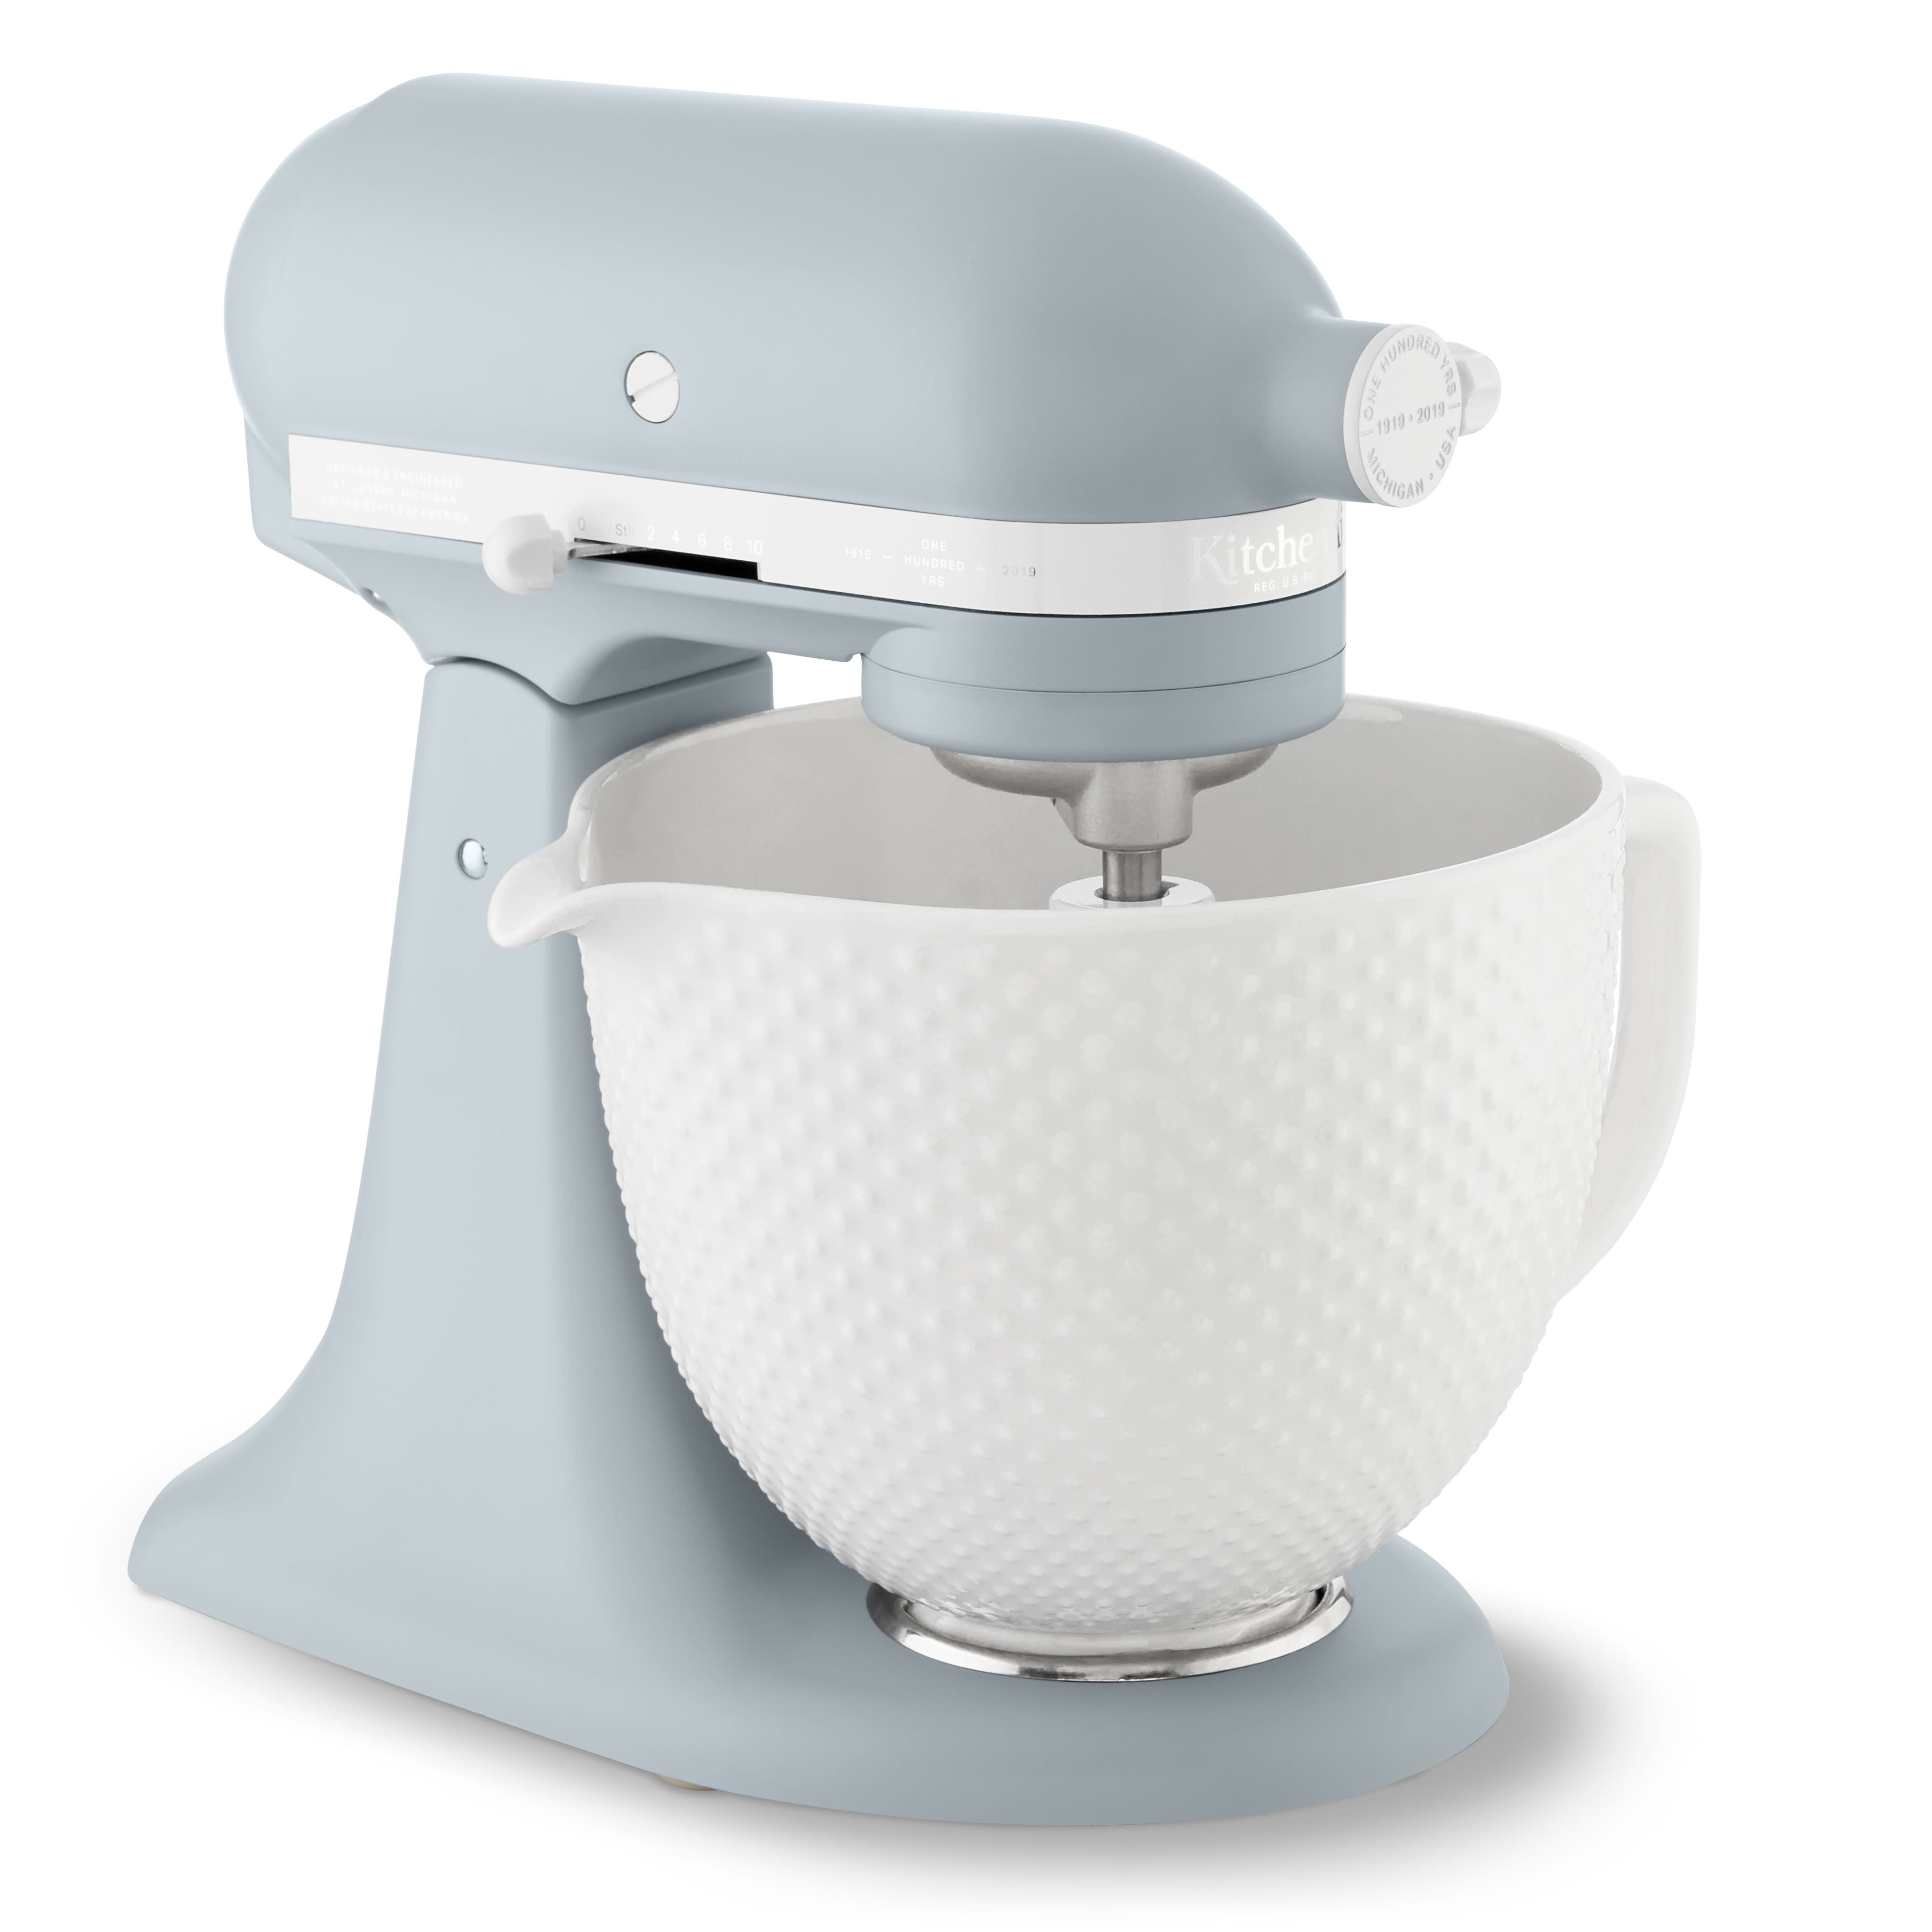 s Selling KitchenAid's Chic 100th Anniversary Mixer for $100 Off